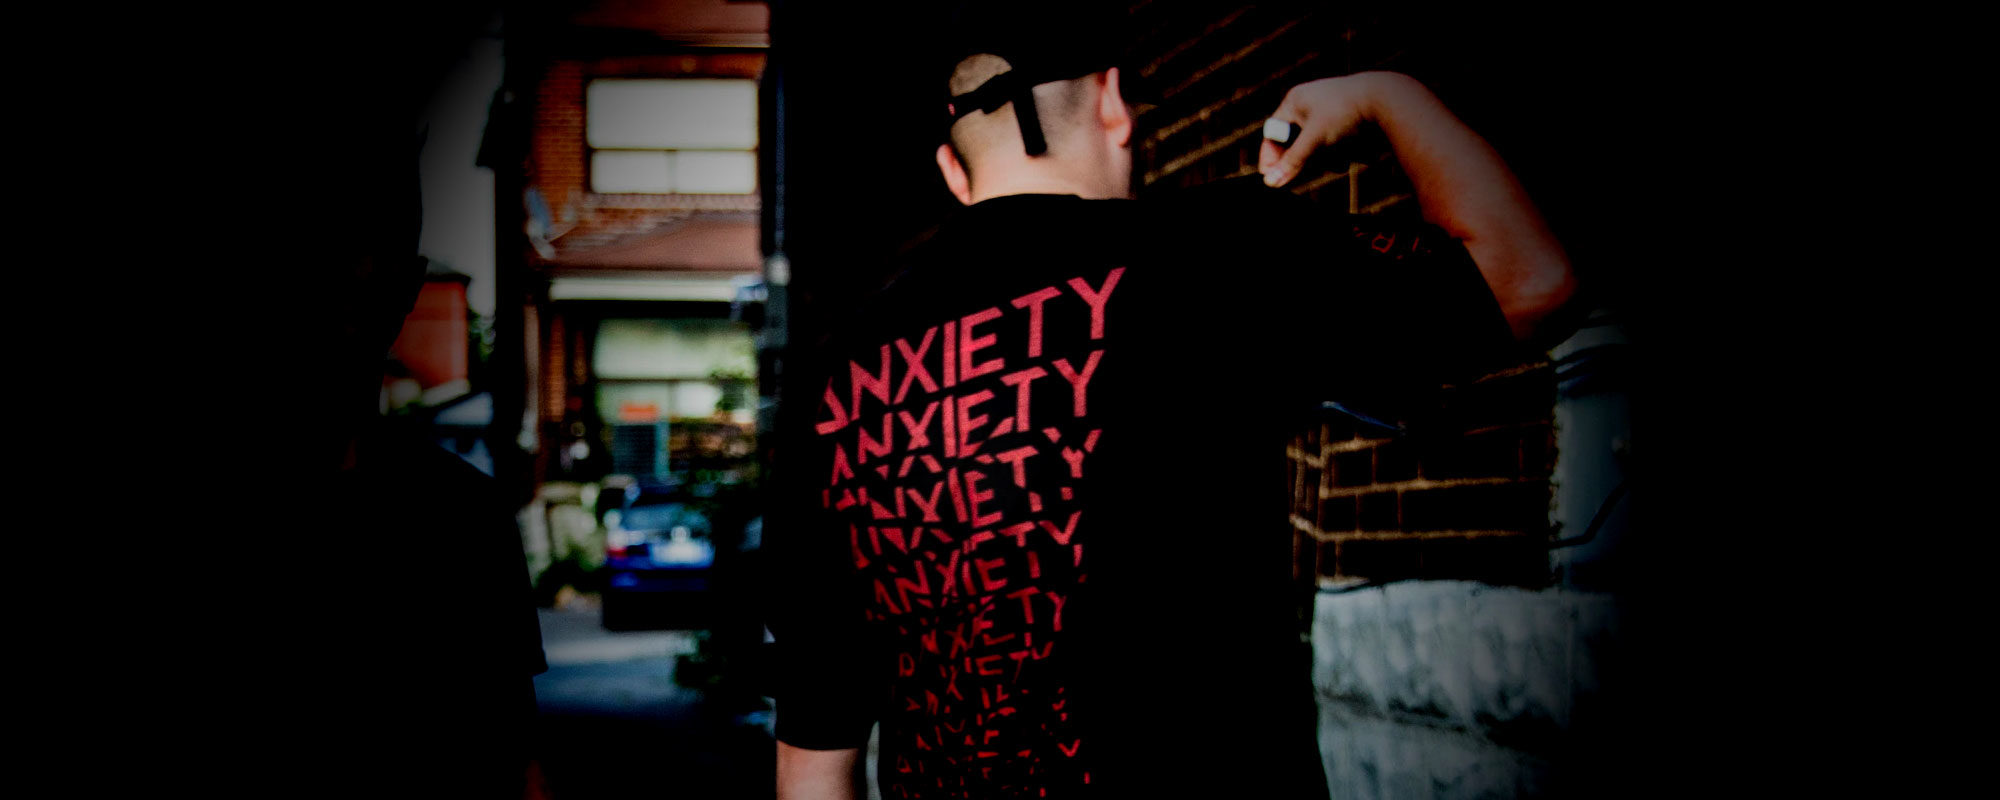 Person wearing Anxiety t shirt in urban dark environment.